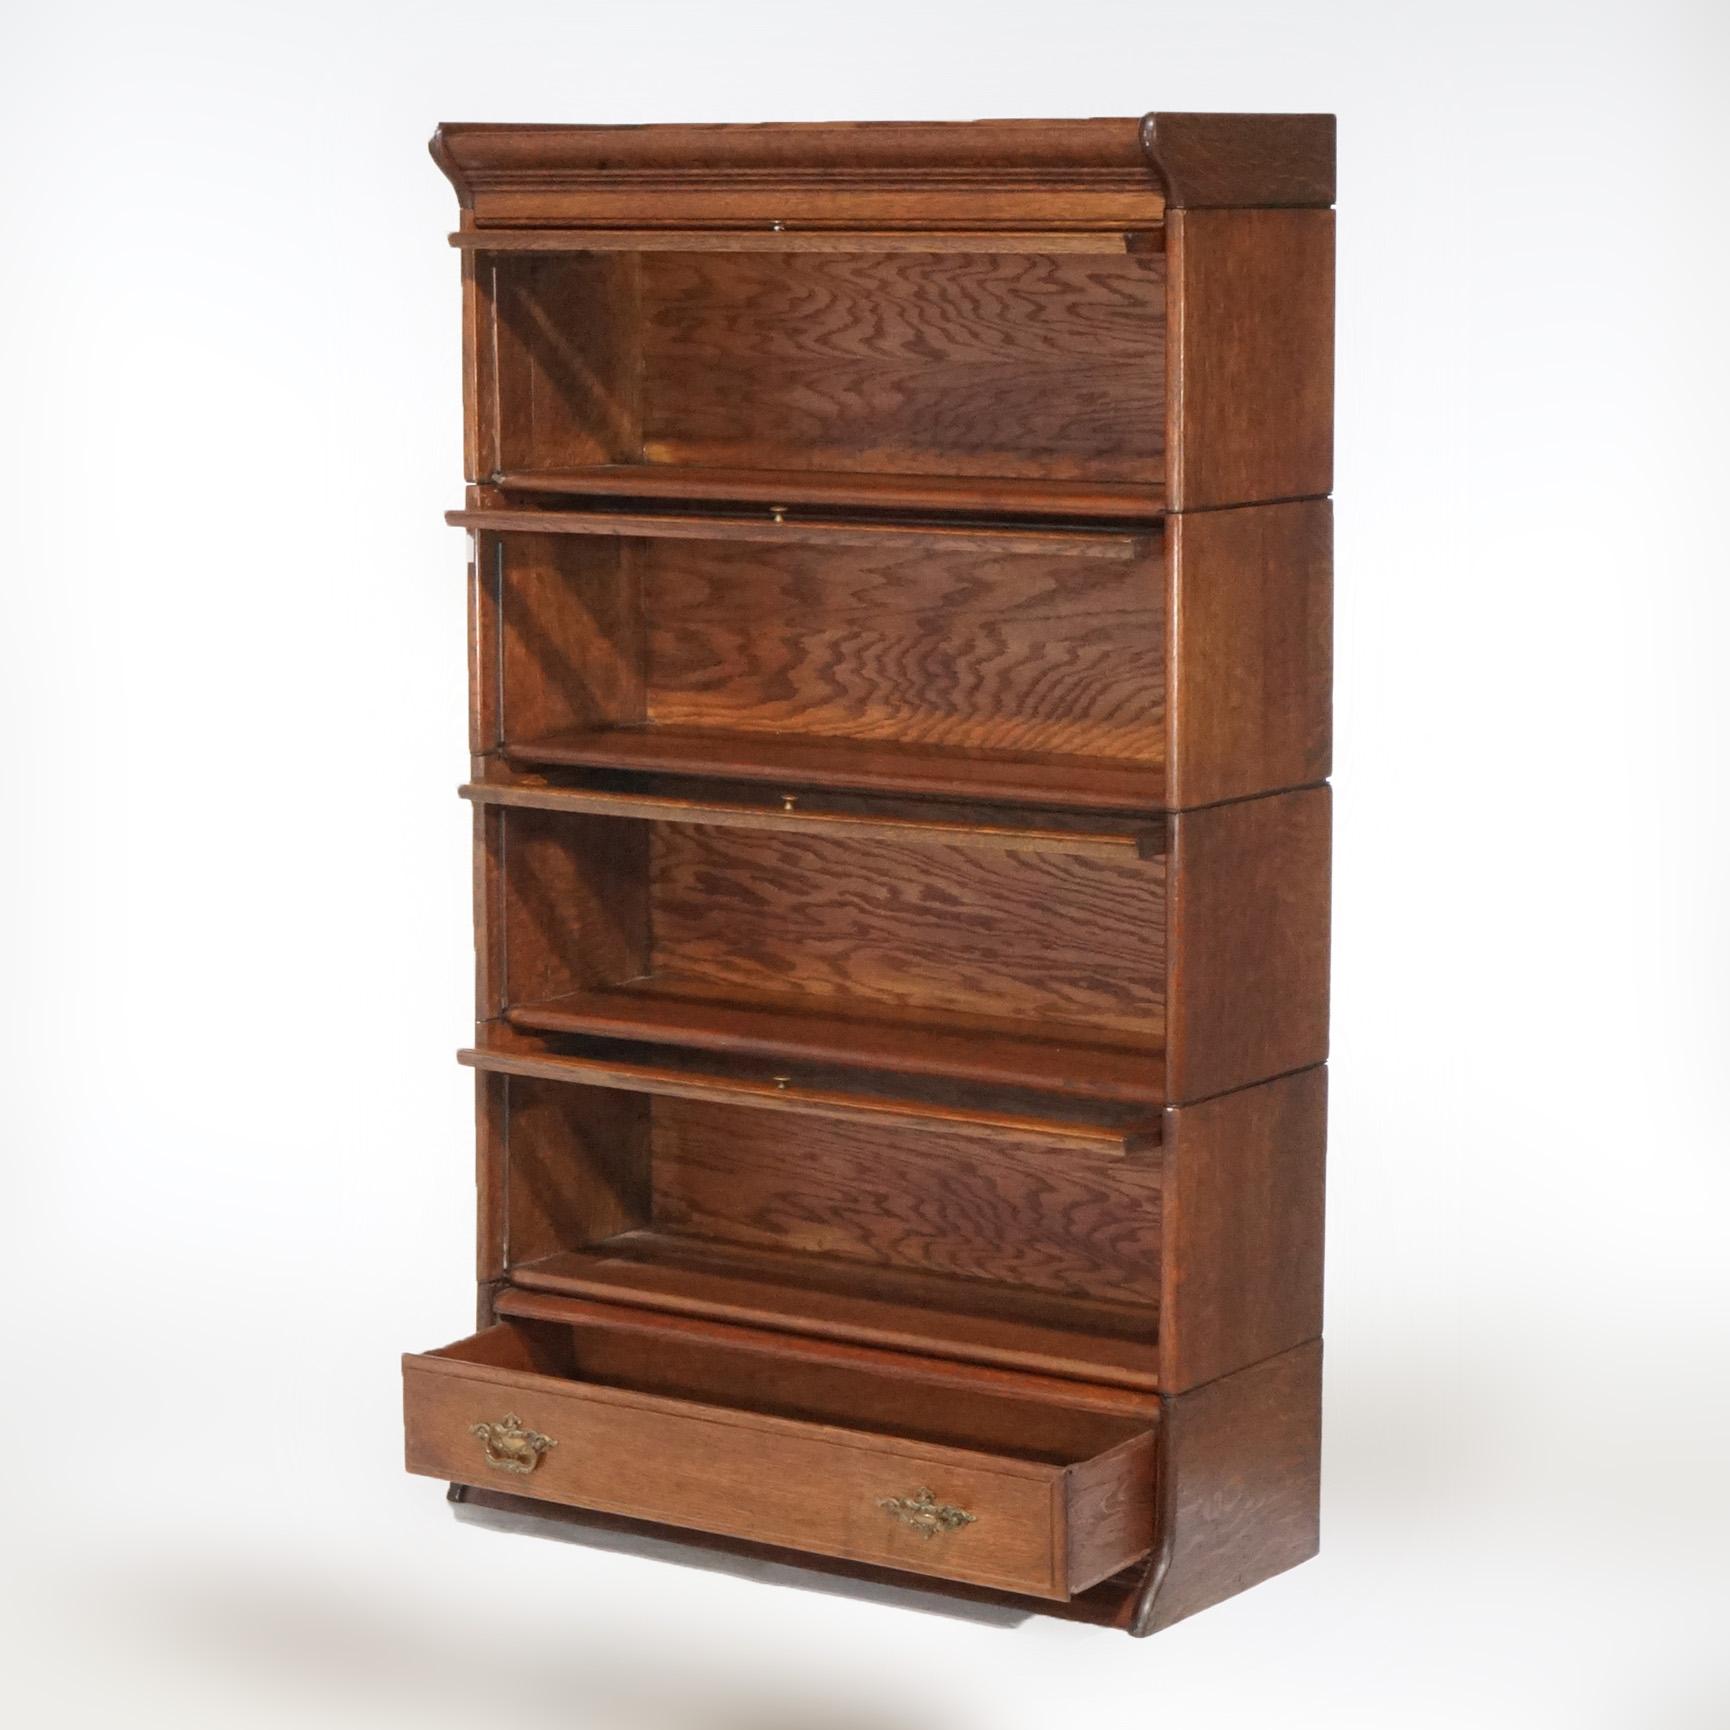 An antique Arts & Crafts mission barrister bookcase offers oak construction with four stacks, each having a pull-out glass door, over base with single long drawers, circa 1910.

Measures - 57.75